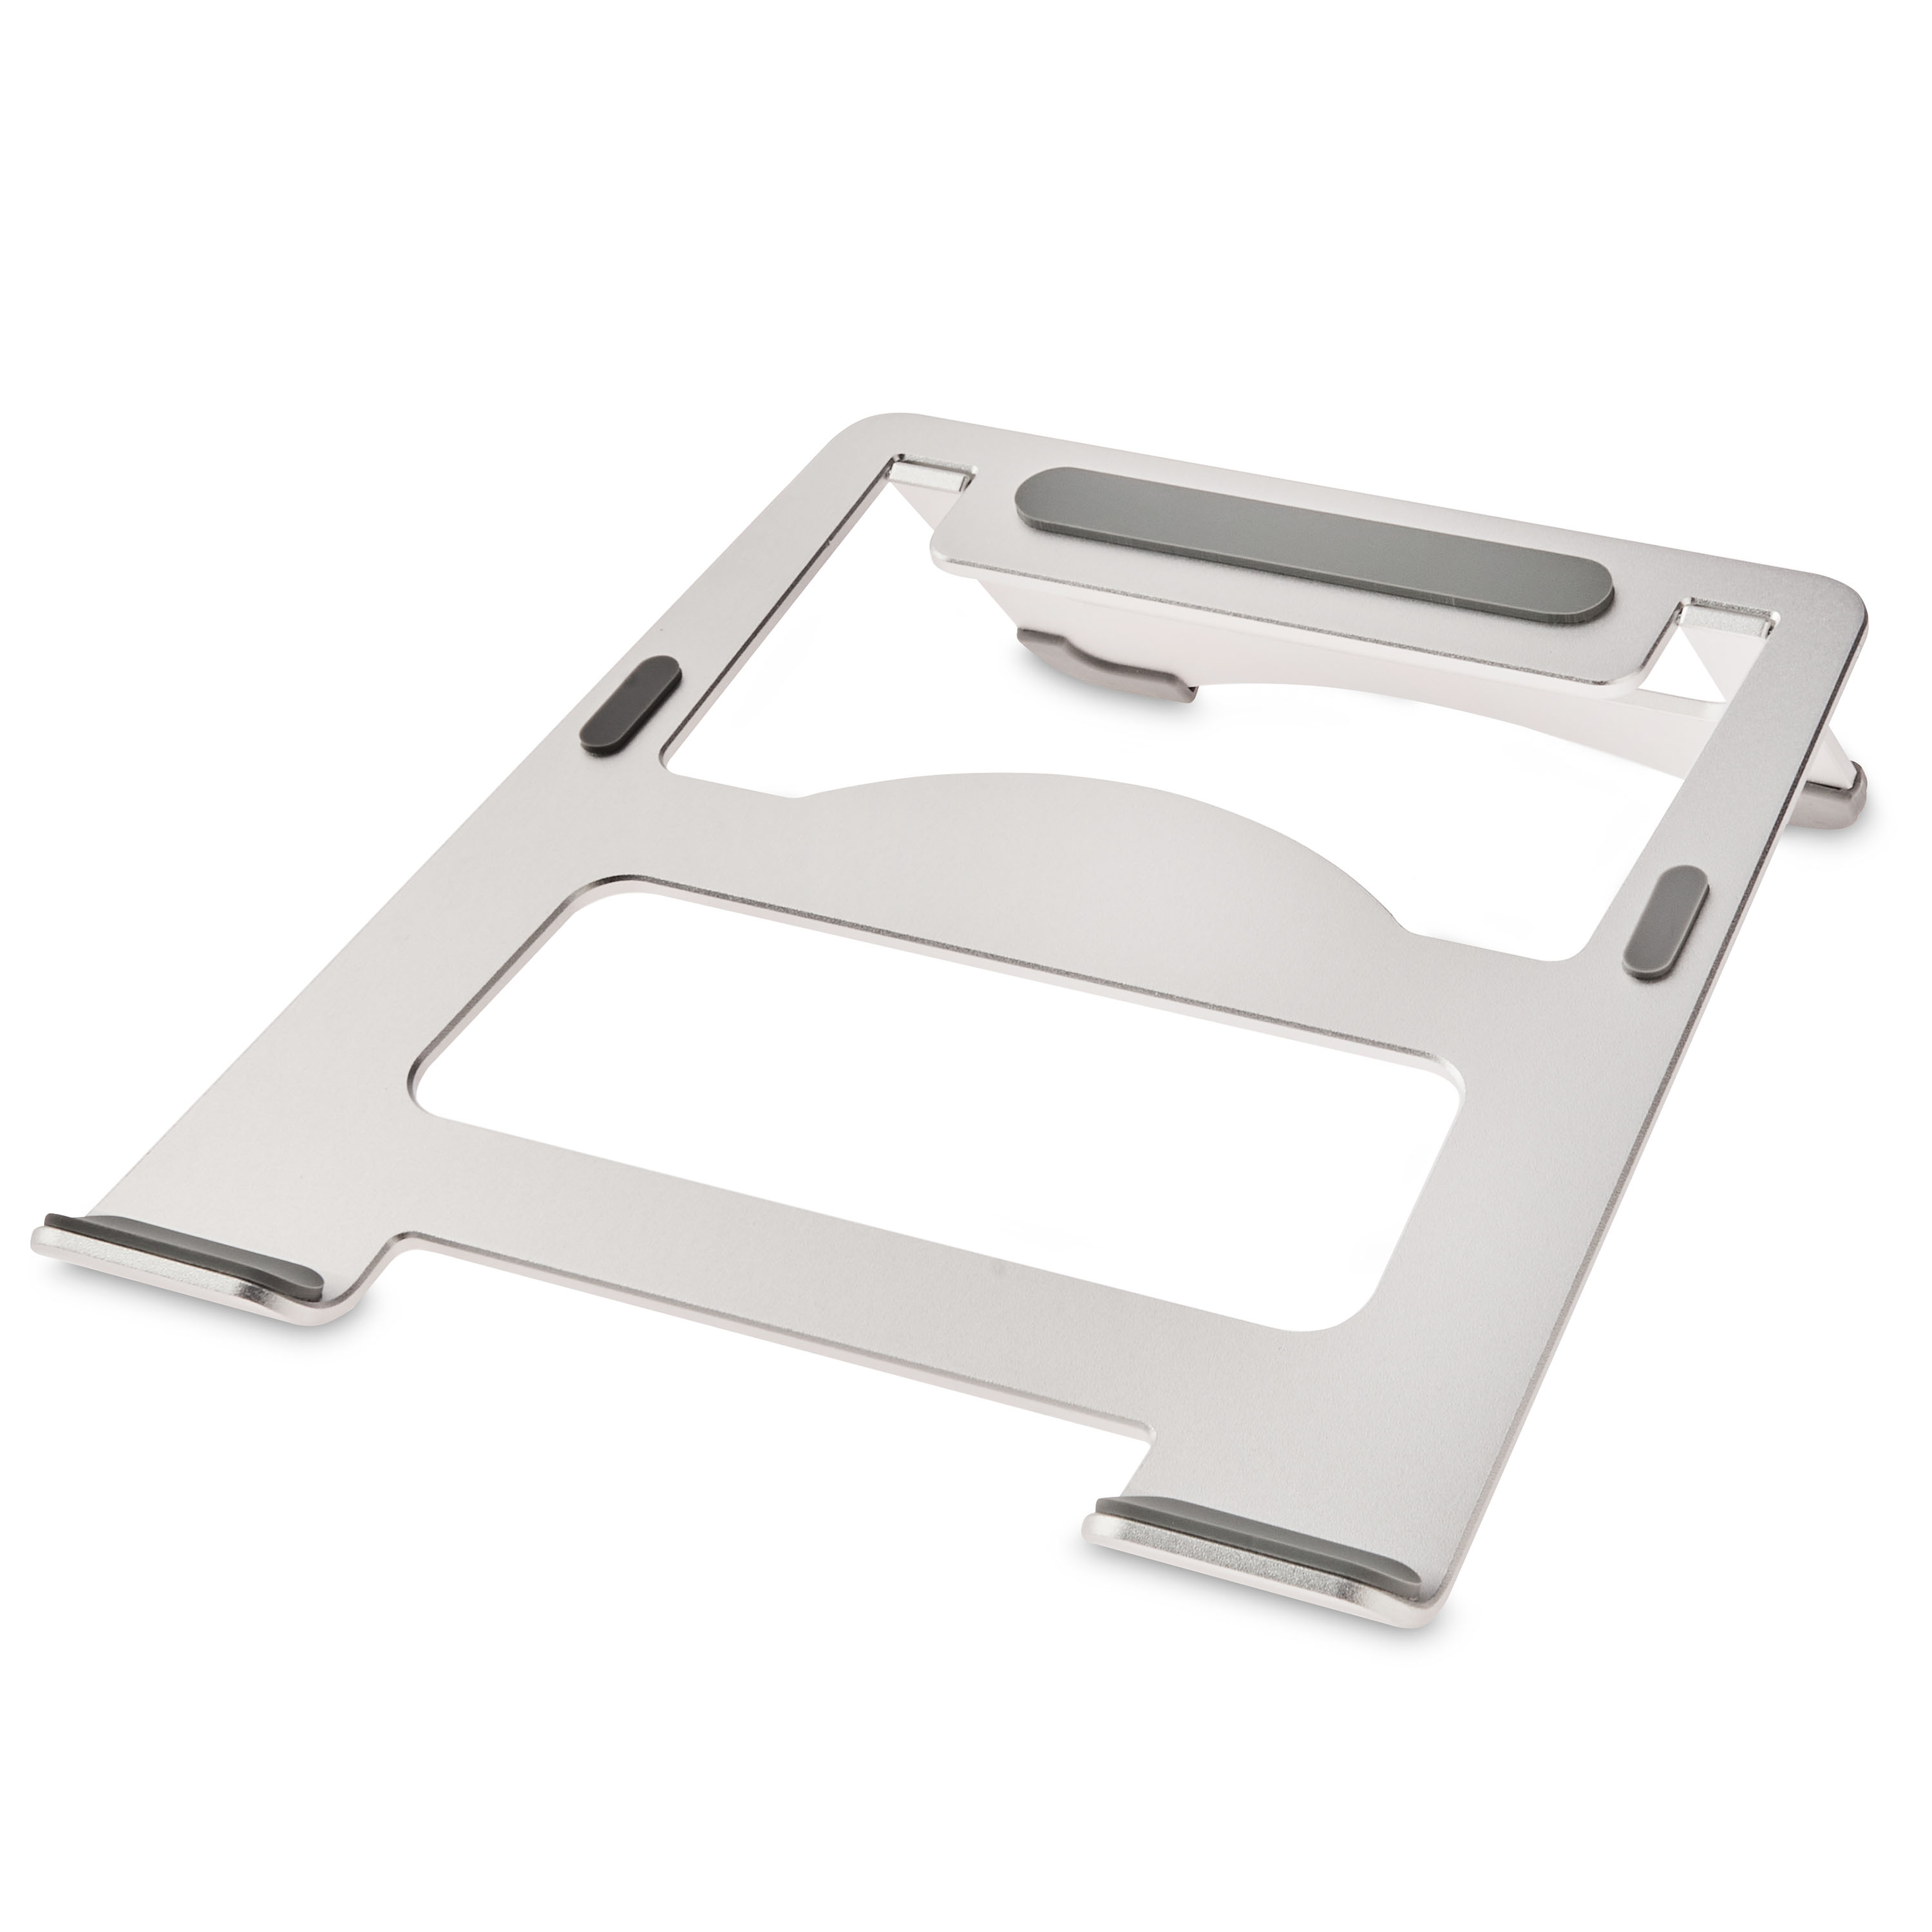 onn. Laptop Stand for 13" to 17" Chromebooks or Laptops - image 1 of 4